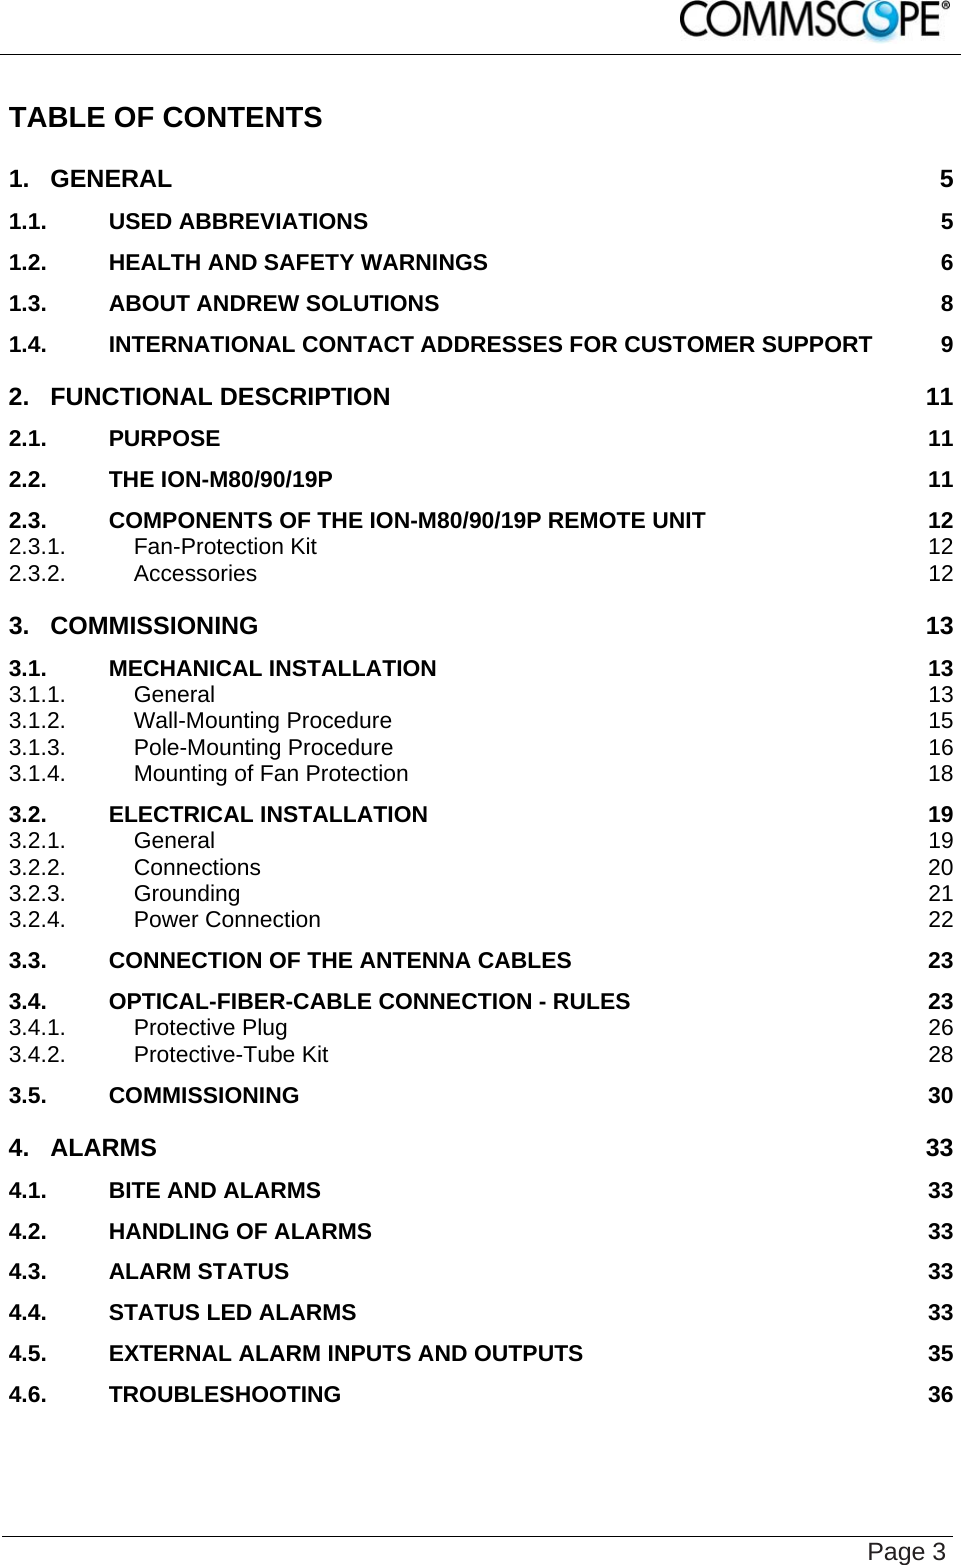    Page 3 TABLE OF CONTENTS 1. GENERAL 5 1.1. USED ABBREVIATIONS 5 1.2. HEALTH AND SAFETY WARNINGS 6 1.3. ABOUT ANDREW SOLUTIONS 8 1.4. INTERNATIONAL CONTACT ADDRESSES FOR CUSTOMER SUPPORT 9 2. FUNCTIONAL DESCRIPTION 11 2.1. PURPOSE 11 2.2. THE ION-M80/90/19P 11 2.3. COMPONENTS OF THE ION-M80/90/19P REMOTE UNIT 12 2.3.1. Fan-Protection Kit 12 2.3.2. Accessories 12 3. COMMISSIONING 13 3.1. MECHANICAL INSTALLATION 13 3.1.1. General 13 3.1.2. Wall-Mounting Procedure 15 3.1.3. Pole-Mounting Procedure 16 3.1.4. Mounting of Fan Protection 18 3.2. ELECTRICAL INSTALLATION 19 3.2.1. General 19 3.2.2. Connections 20 3.2.3. Grounding 21 3.2.4. Power Connection 22 3.3. CONNECTION OF THE ANTENNA CABLES 23 3.4. OPTICAL-FIBER-CABLE CONNECTION - RULES 23 3.4.1. Protective Plug 26 3.4.2. Protective-Tube Kit 28 3.5. COMMISSIONING 30 4. ALARMS 33 4.1. BITE AND ALARMS 33 4.2. HANDLING OF ALARMS 33 4.3. ALARM STATUS 33 4.4. STATUS LED ALARMS 33 4.5. EXTERNAL ALARM INPUTS AND OUTPUTS 35 4.6. TROUBLESHOOTING 36 